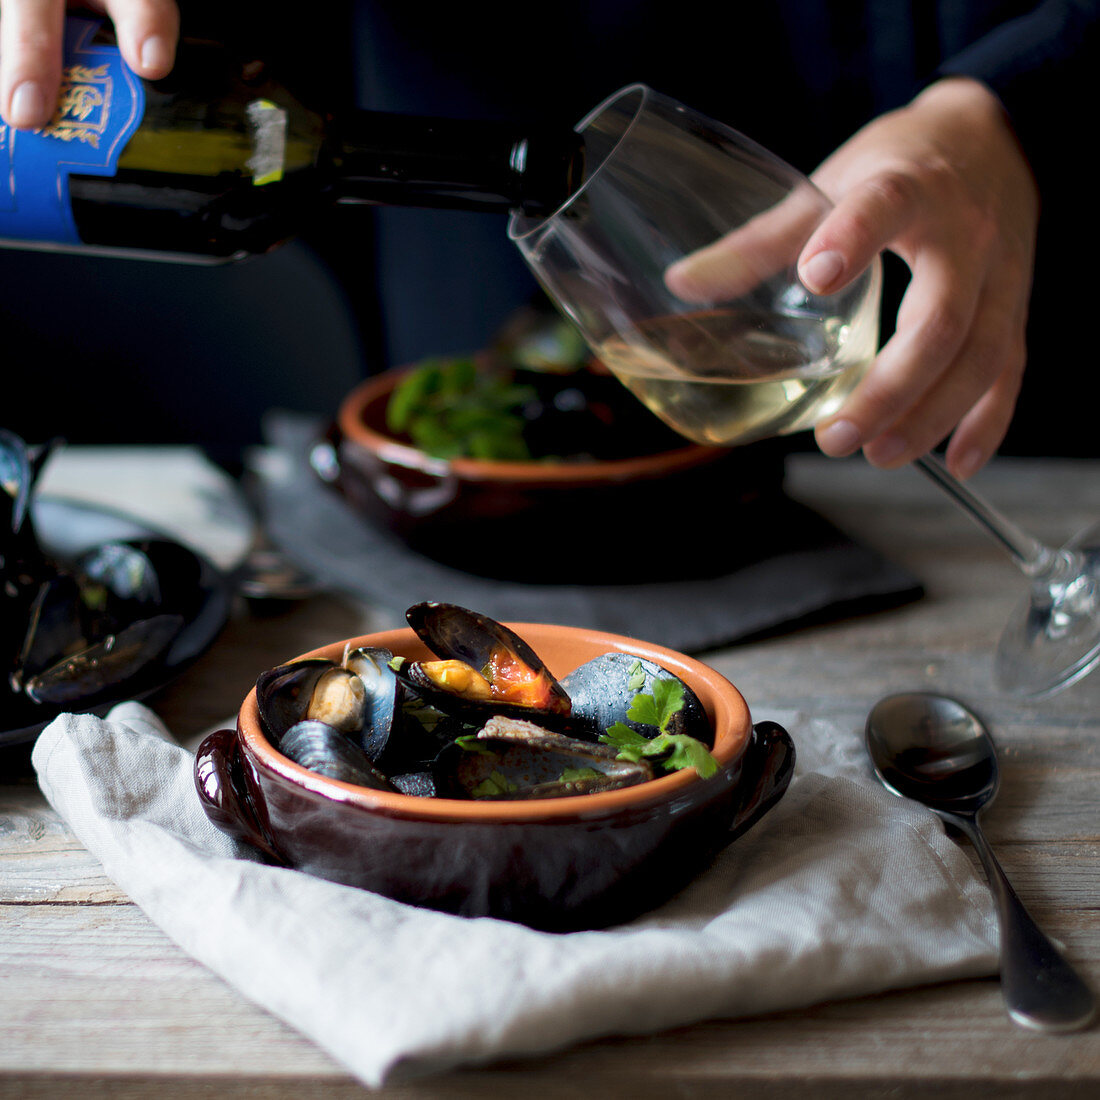 White wine being poured over a mussel dish